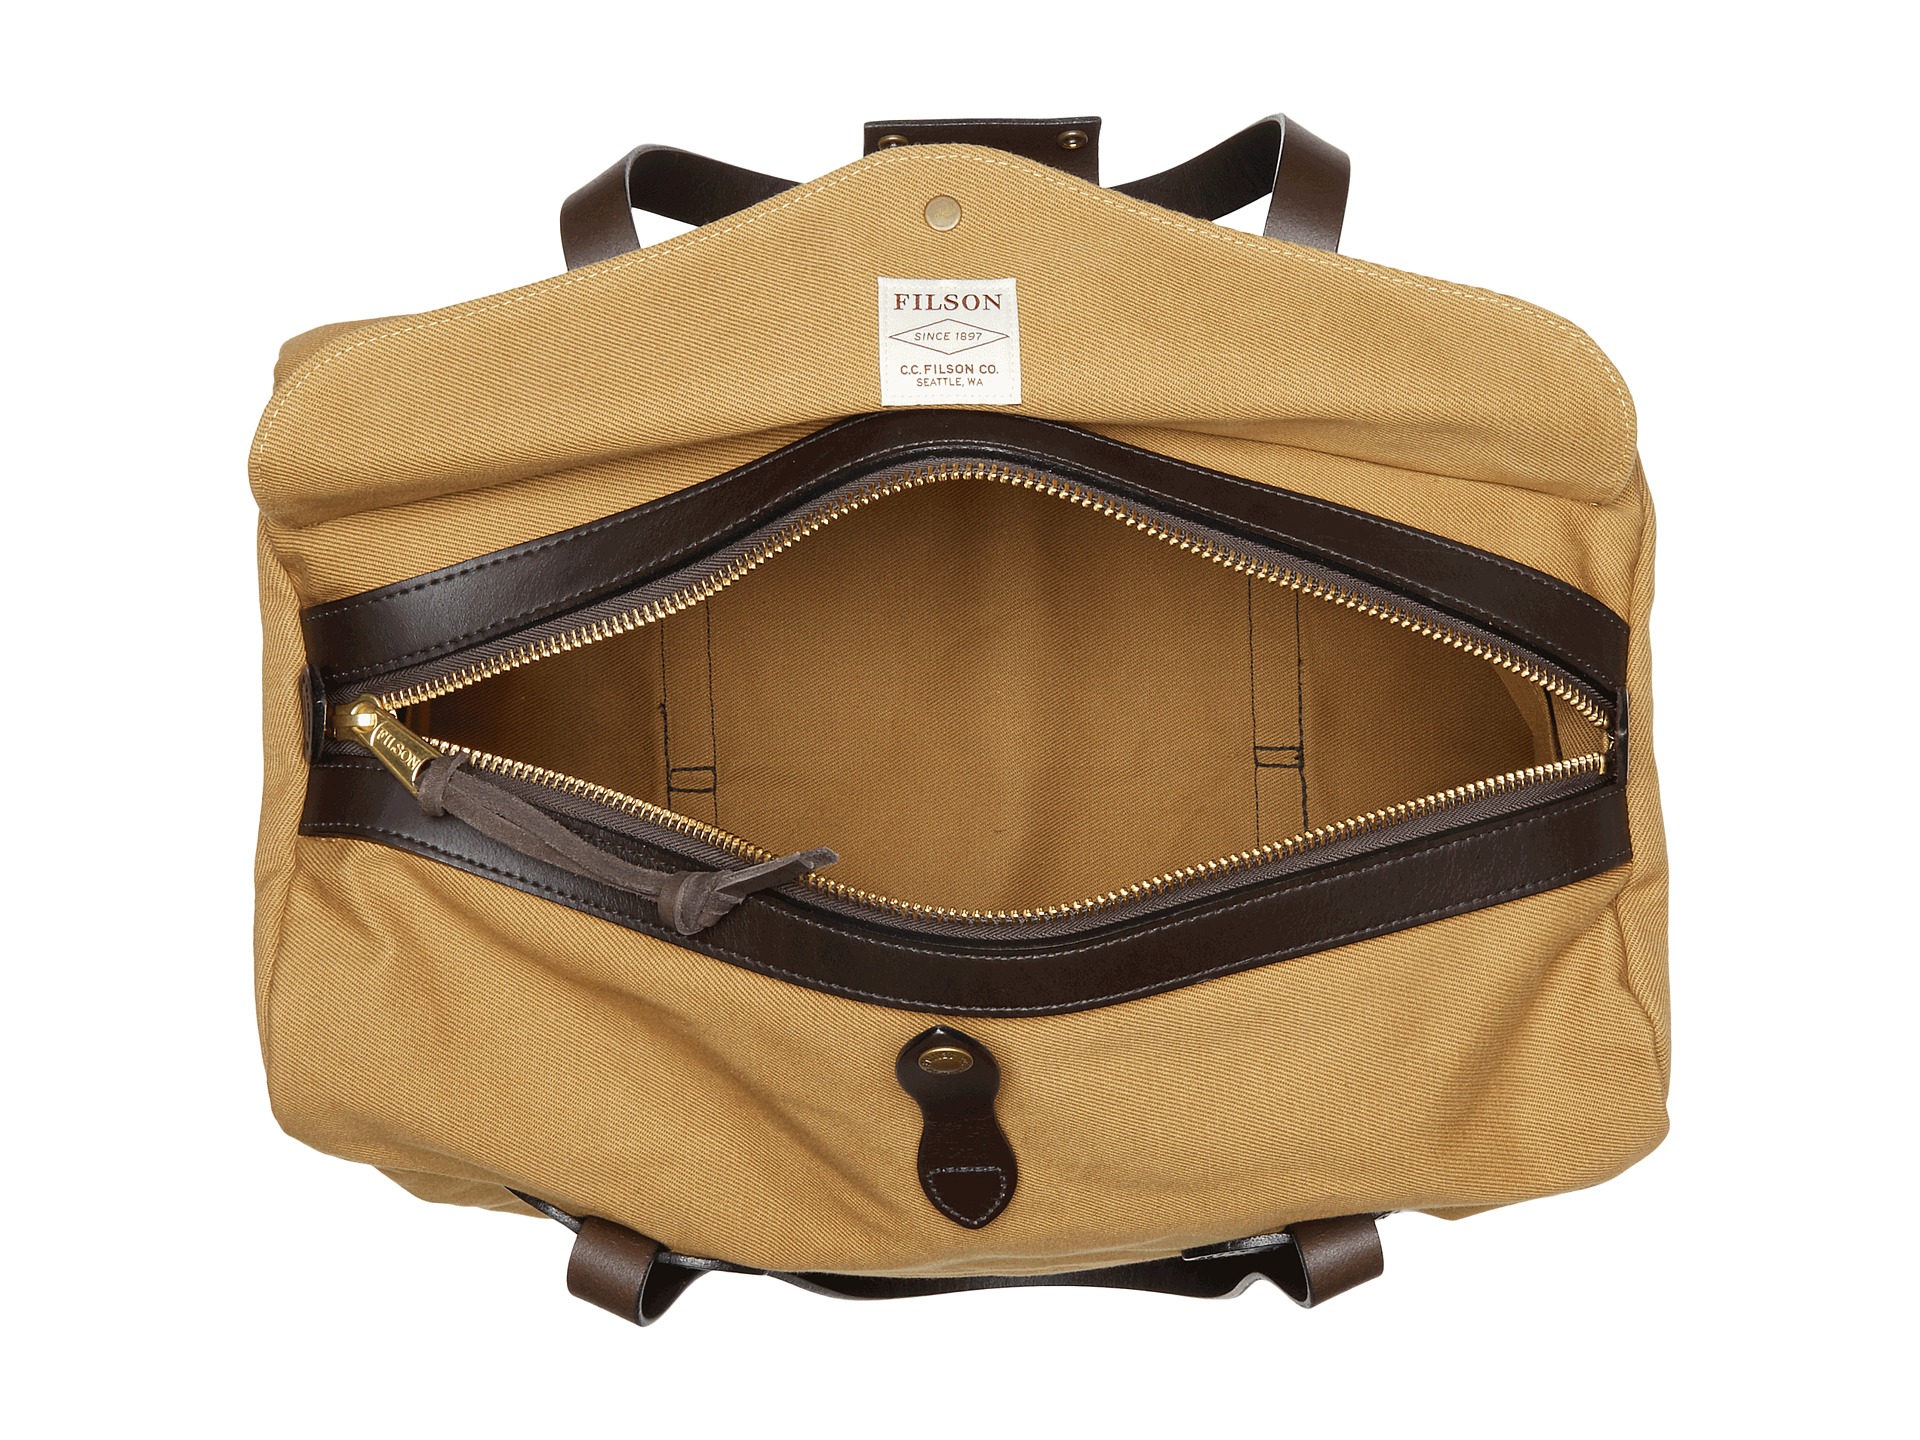 Filson Small Duffle Bag Tan - www.bagssaleusa.com/product-category/classic-bags/ Free Shipping BOTH Ways